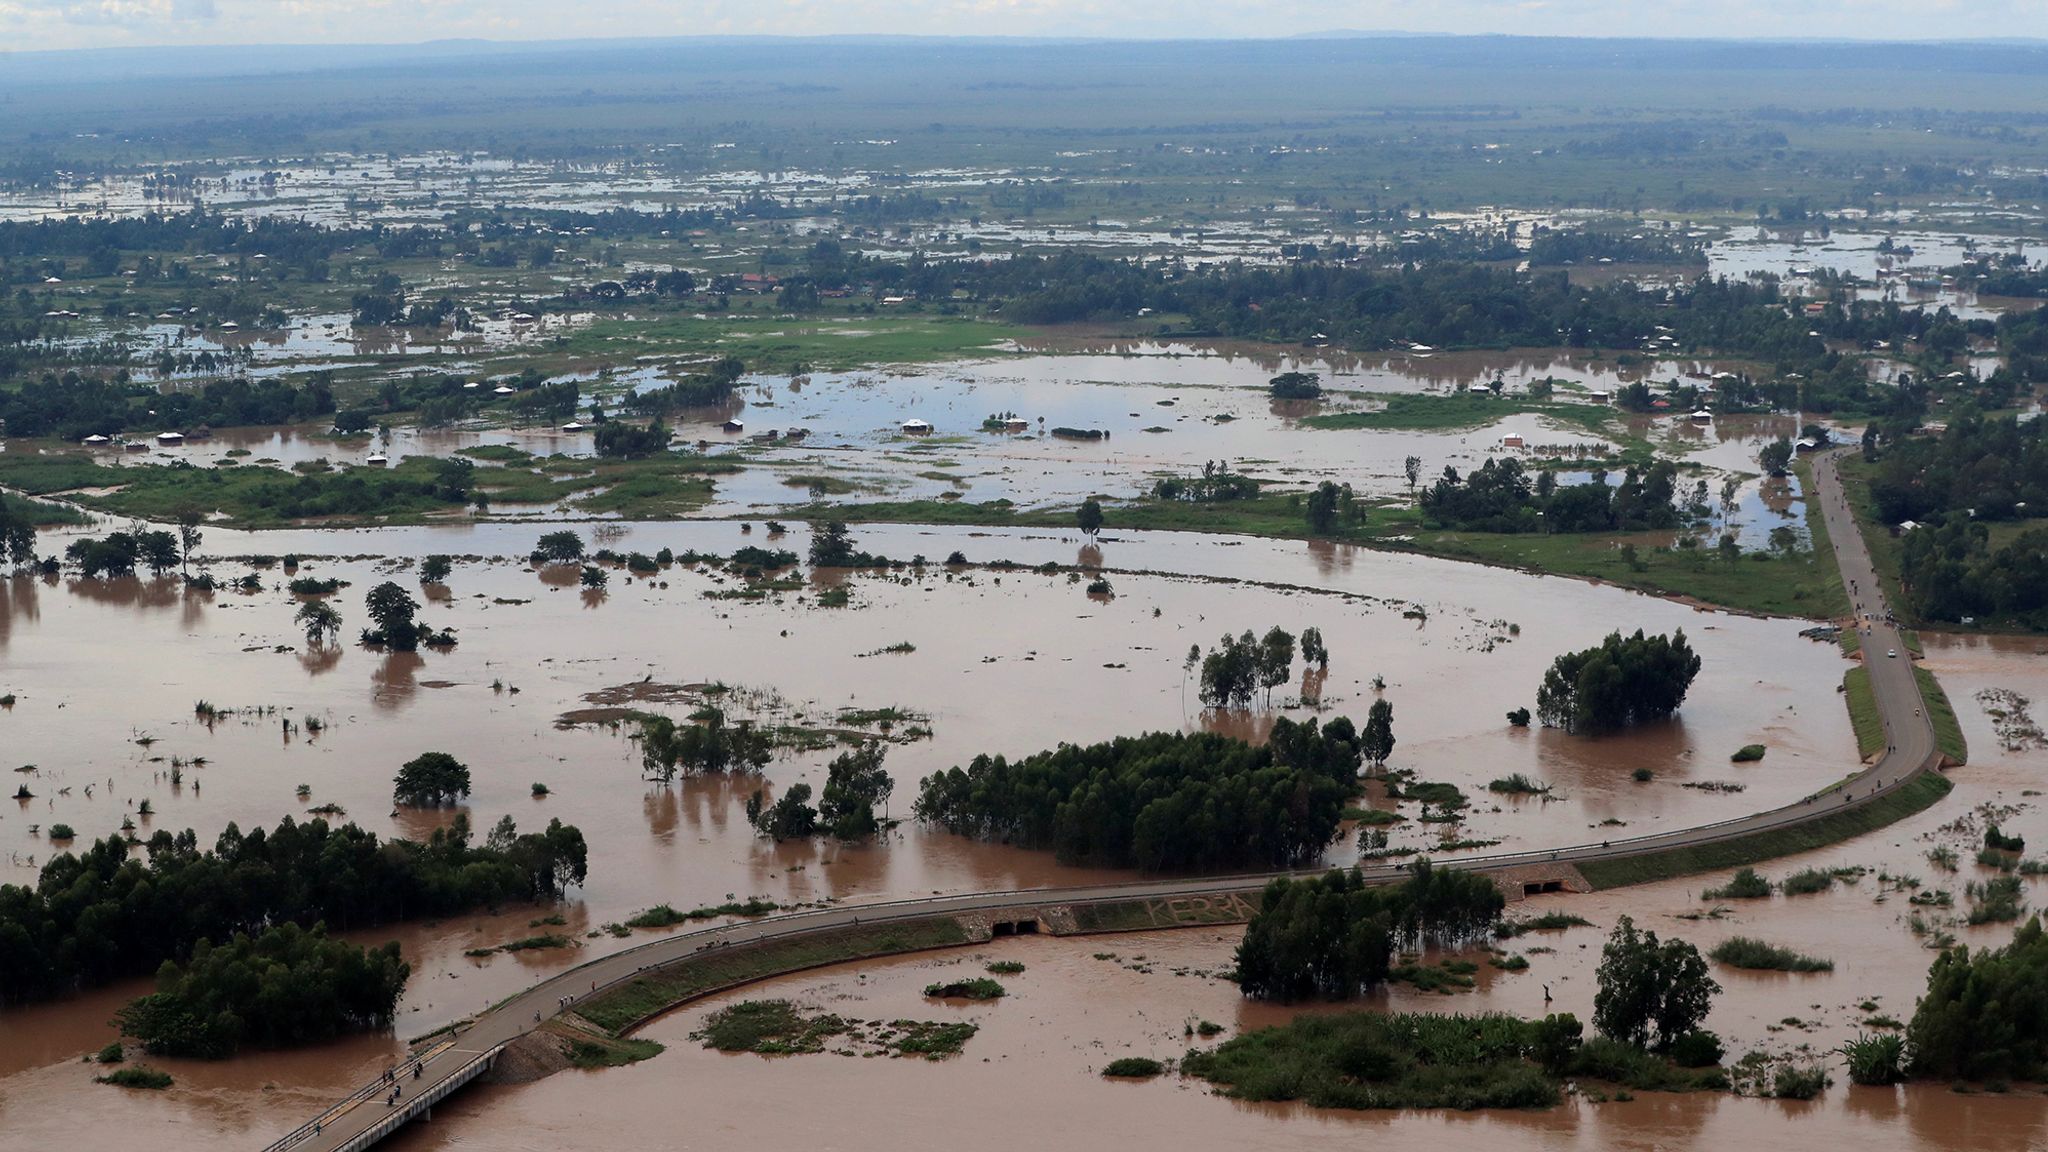 Kenya Severe flooding kills nearly 200 people and displaces 100,000